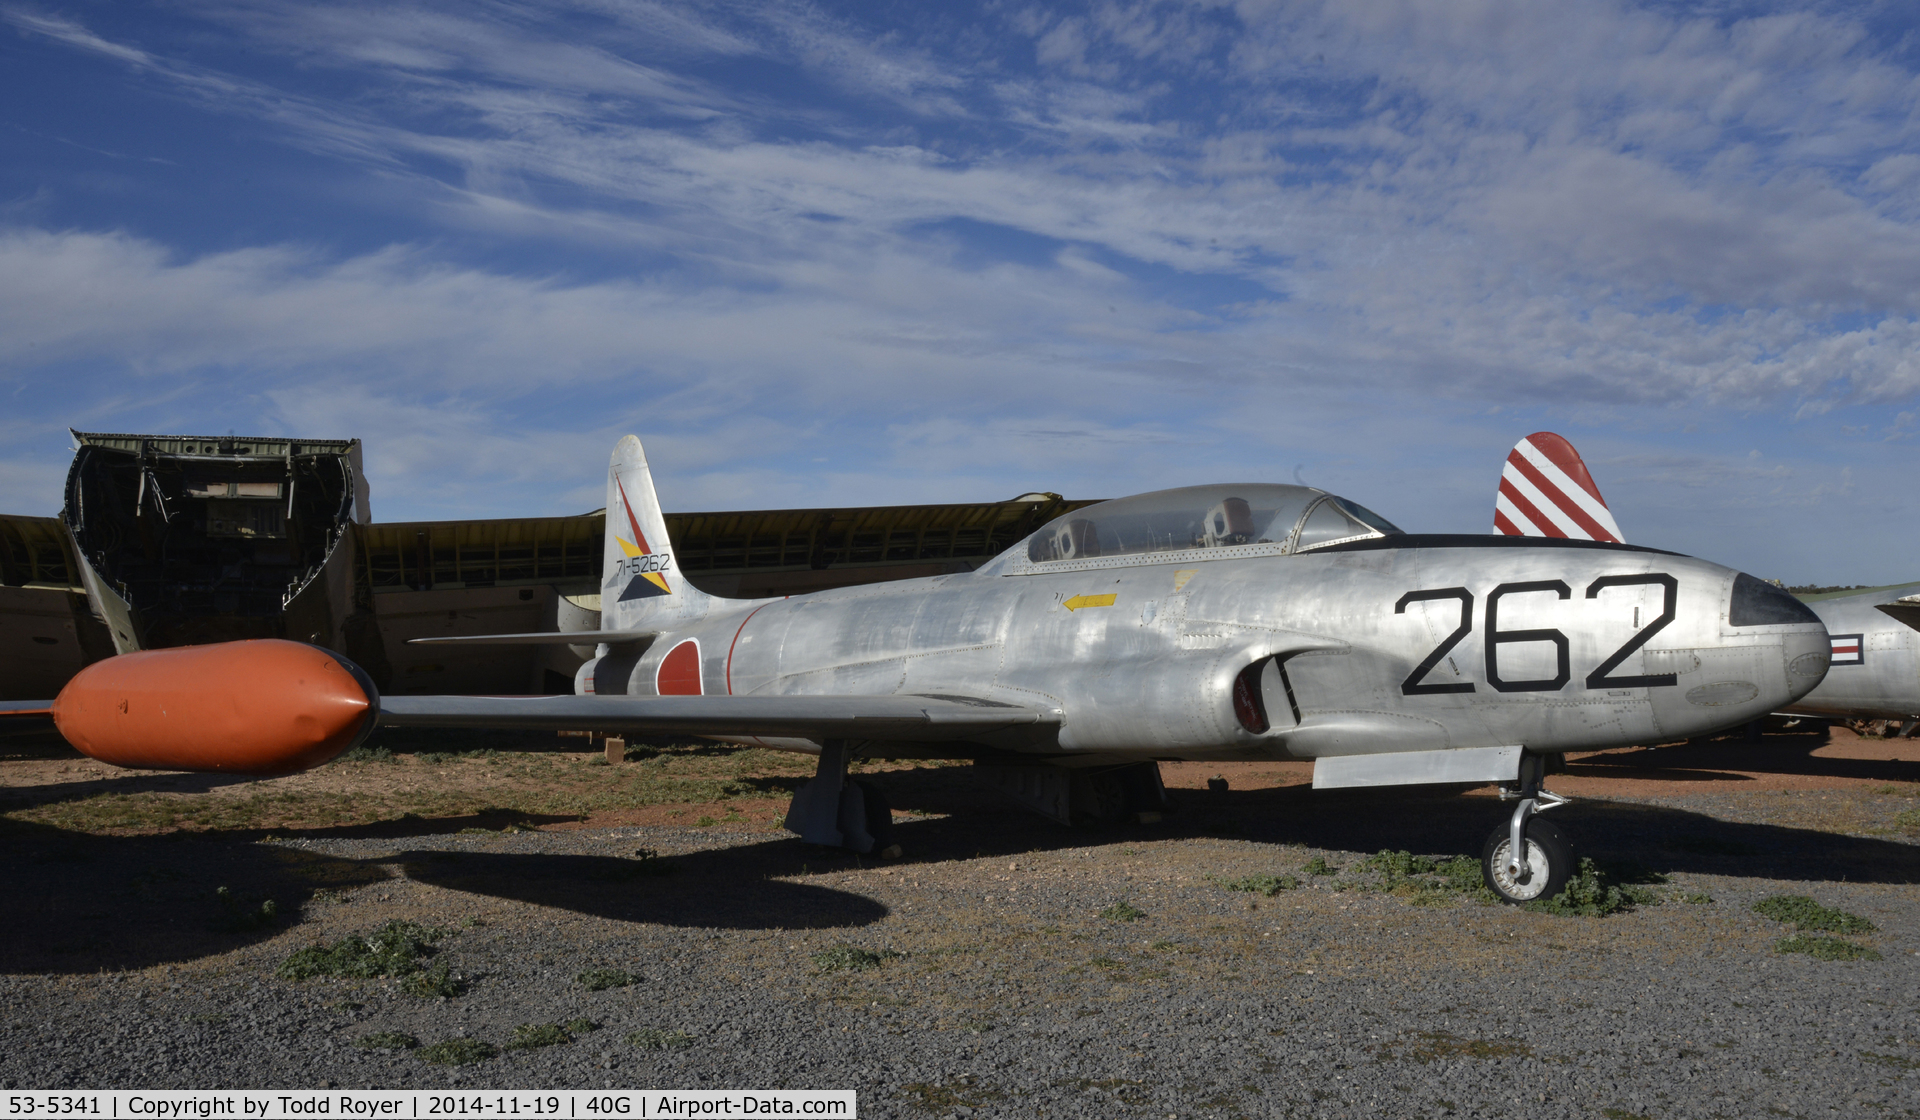 53-5341, 1953 Lockheed T-33A Shooting Star C/N 580-8680, On display at the Planes of Fame Valle location